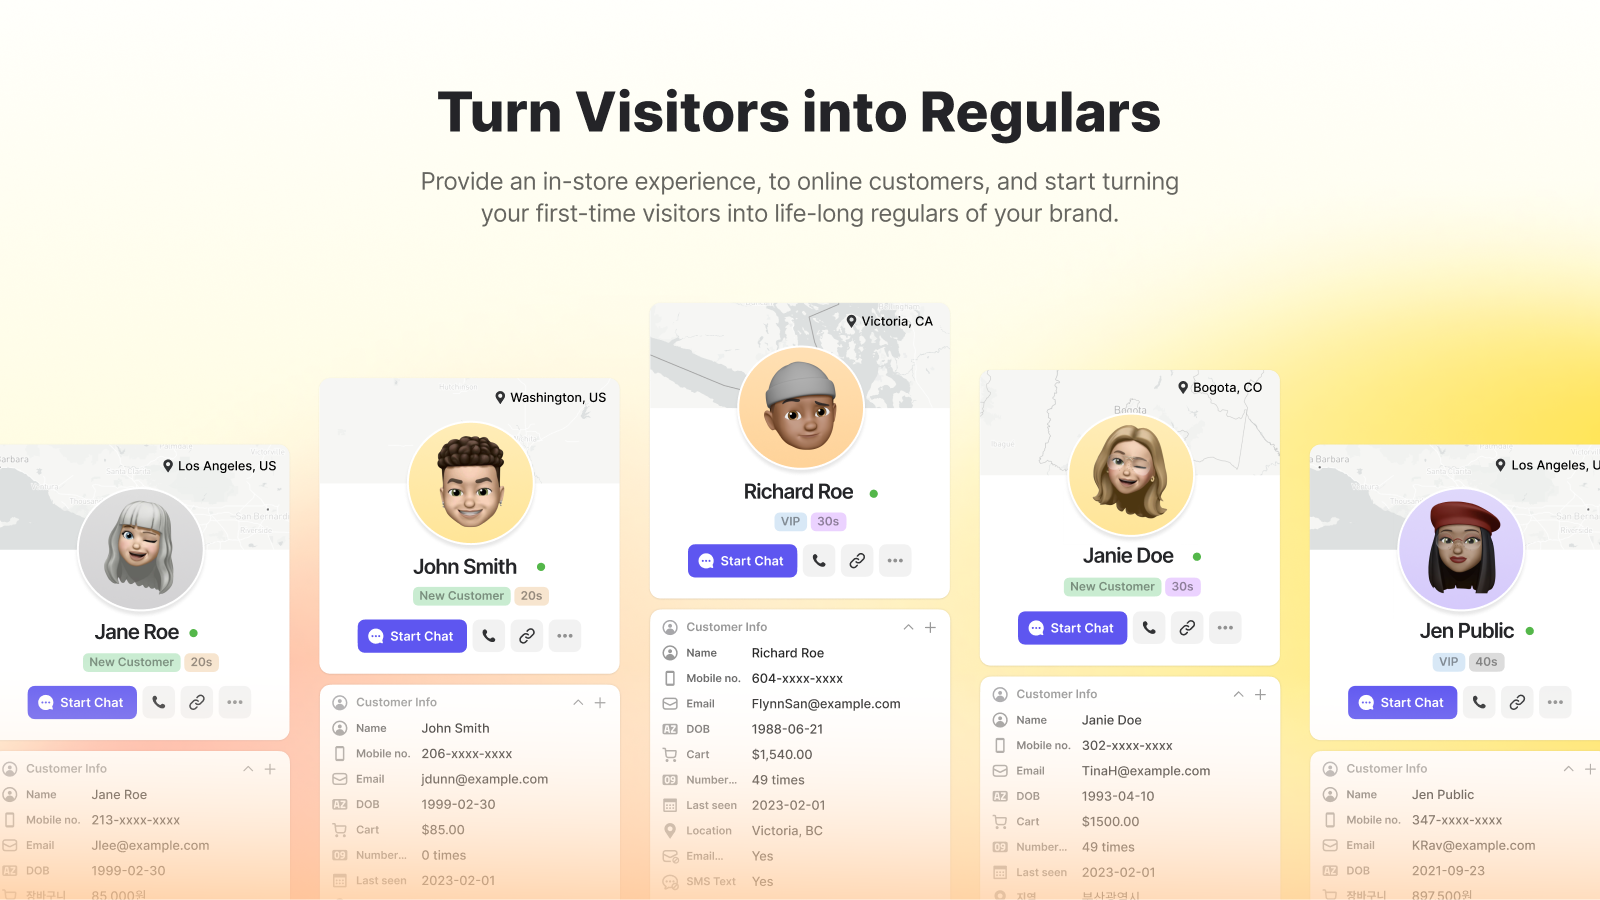 Turn Visitors into Regulars - Provide an in-store experience, to online customers, and start turning your first-time visitors into life-long regulars of your brand.